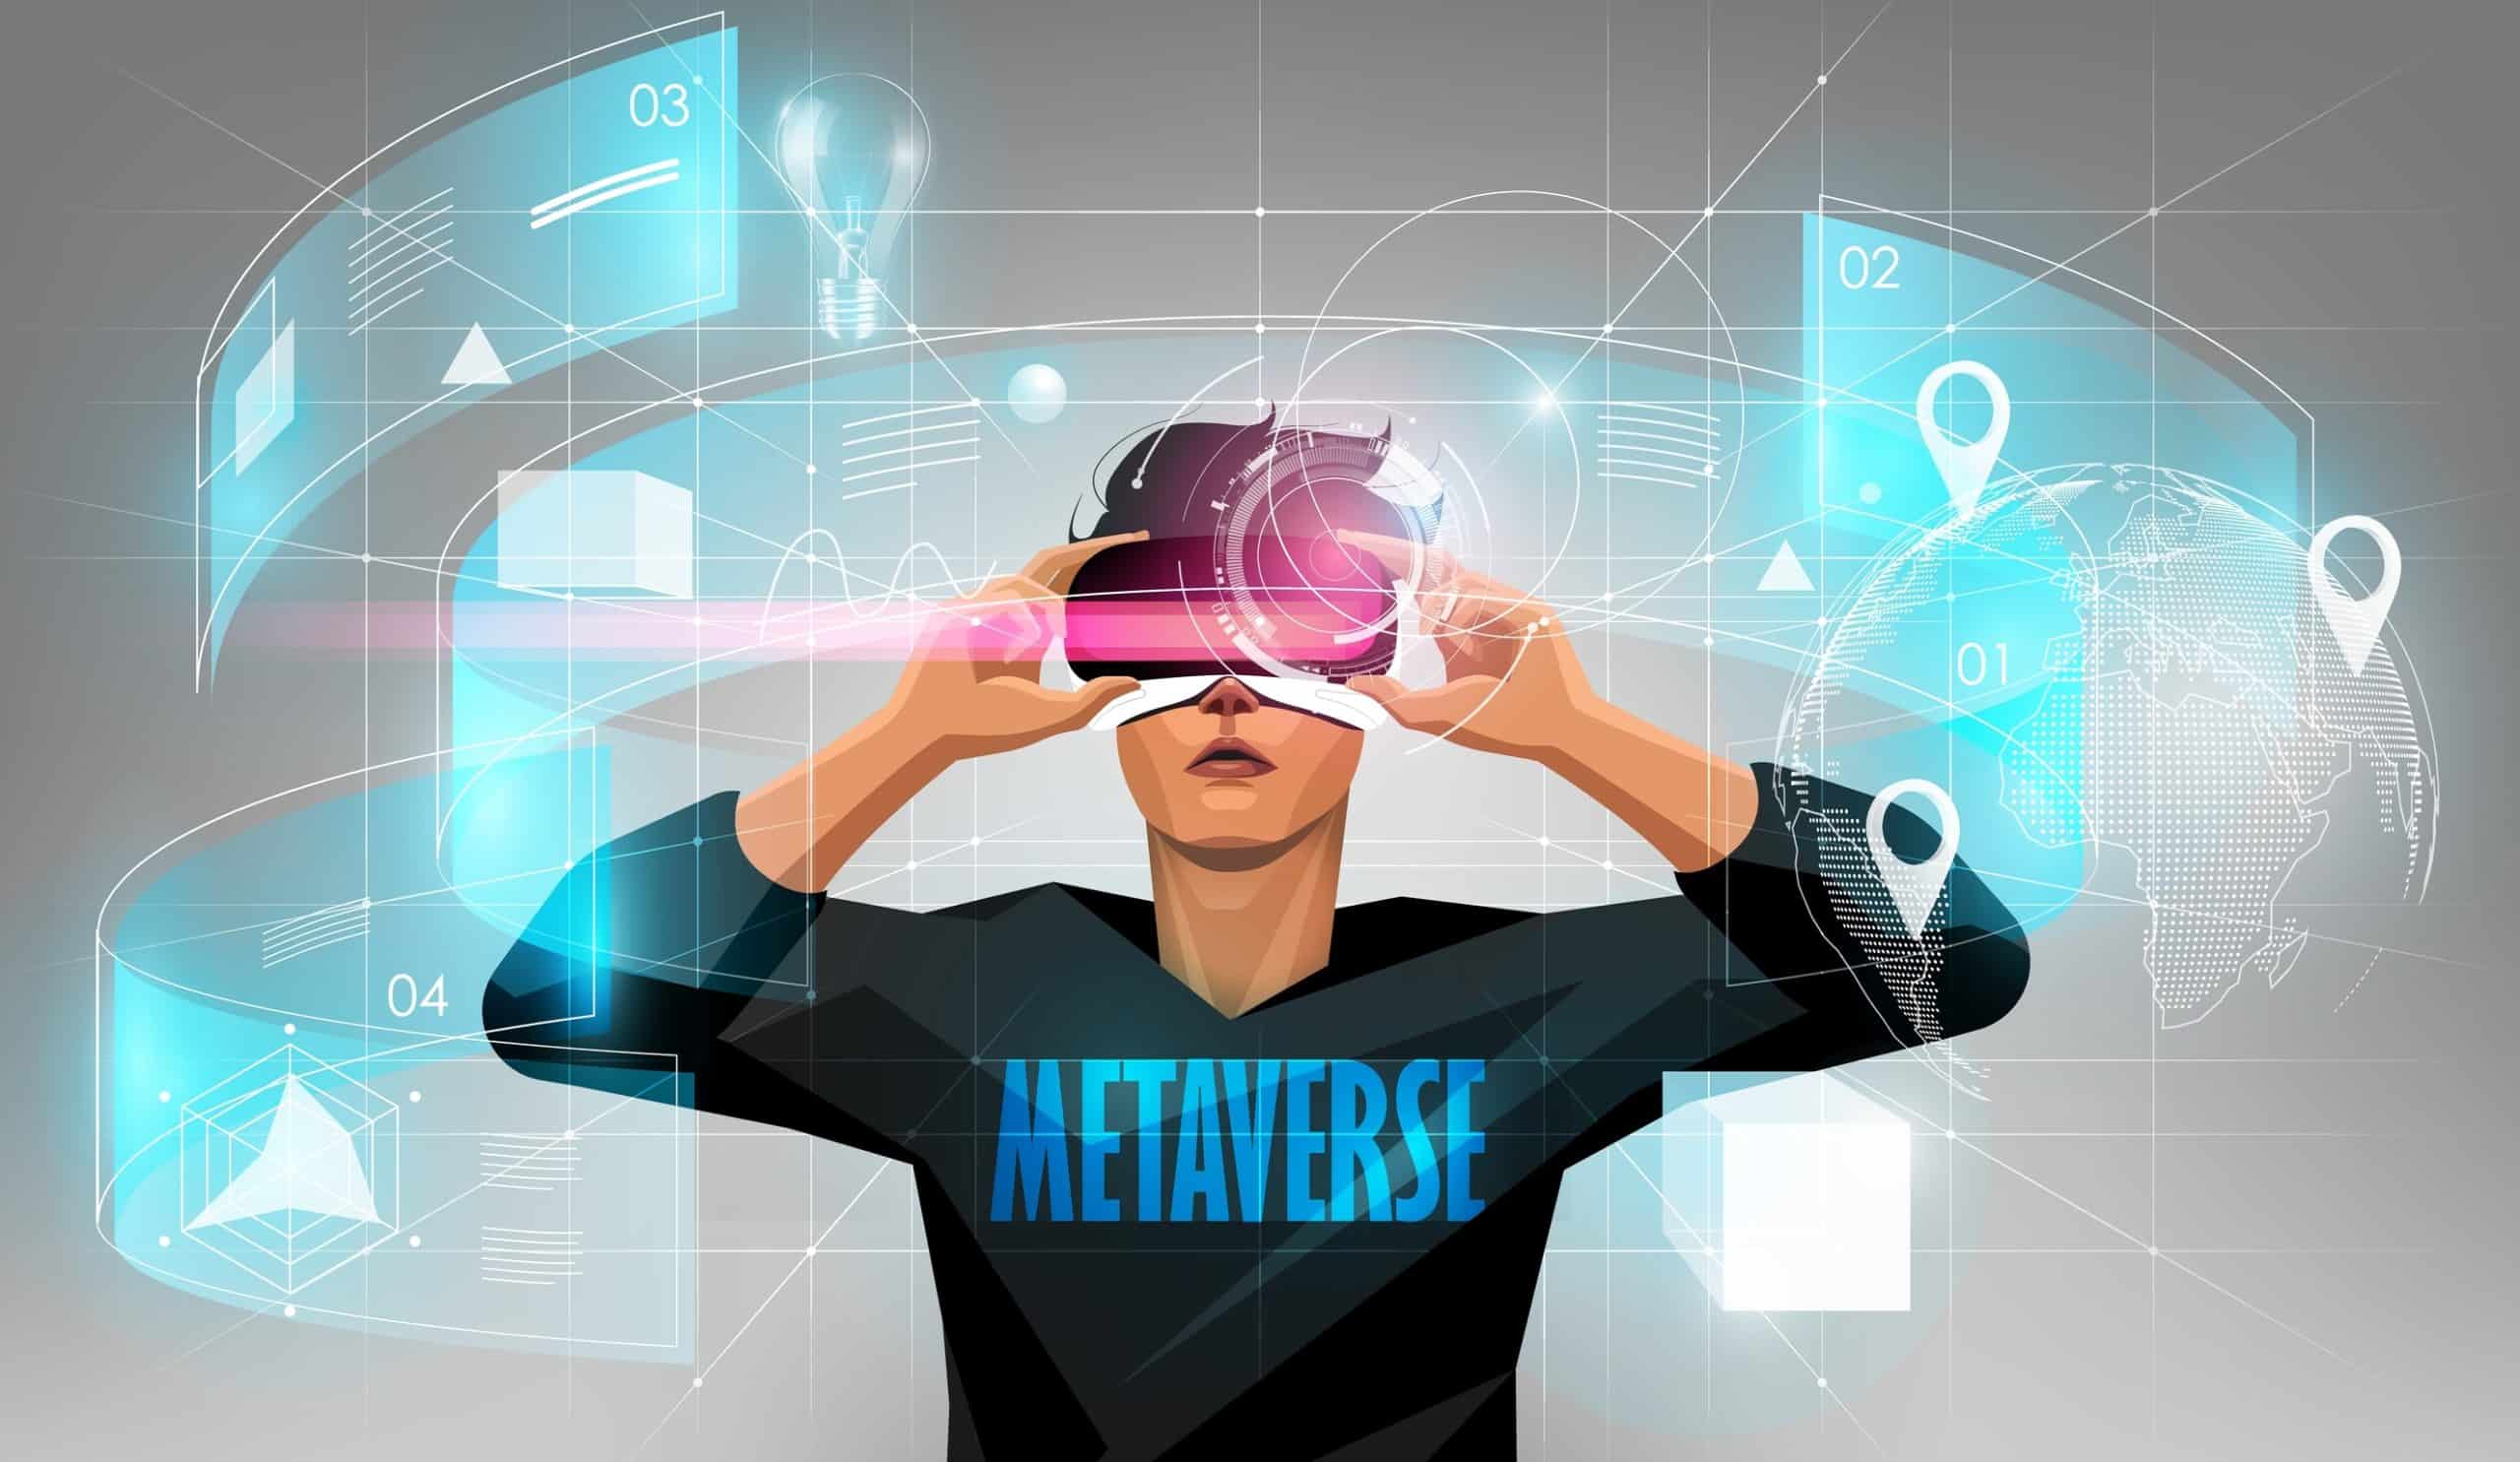 The Metaverse: What Is It?